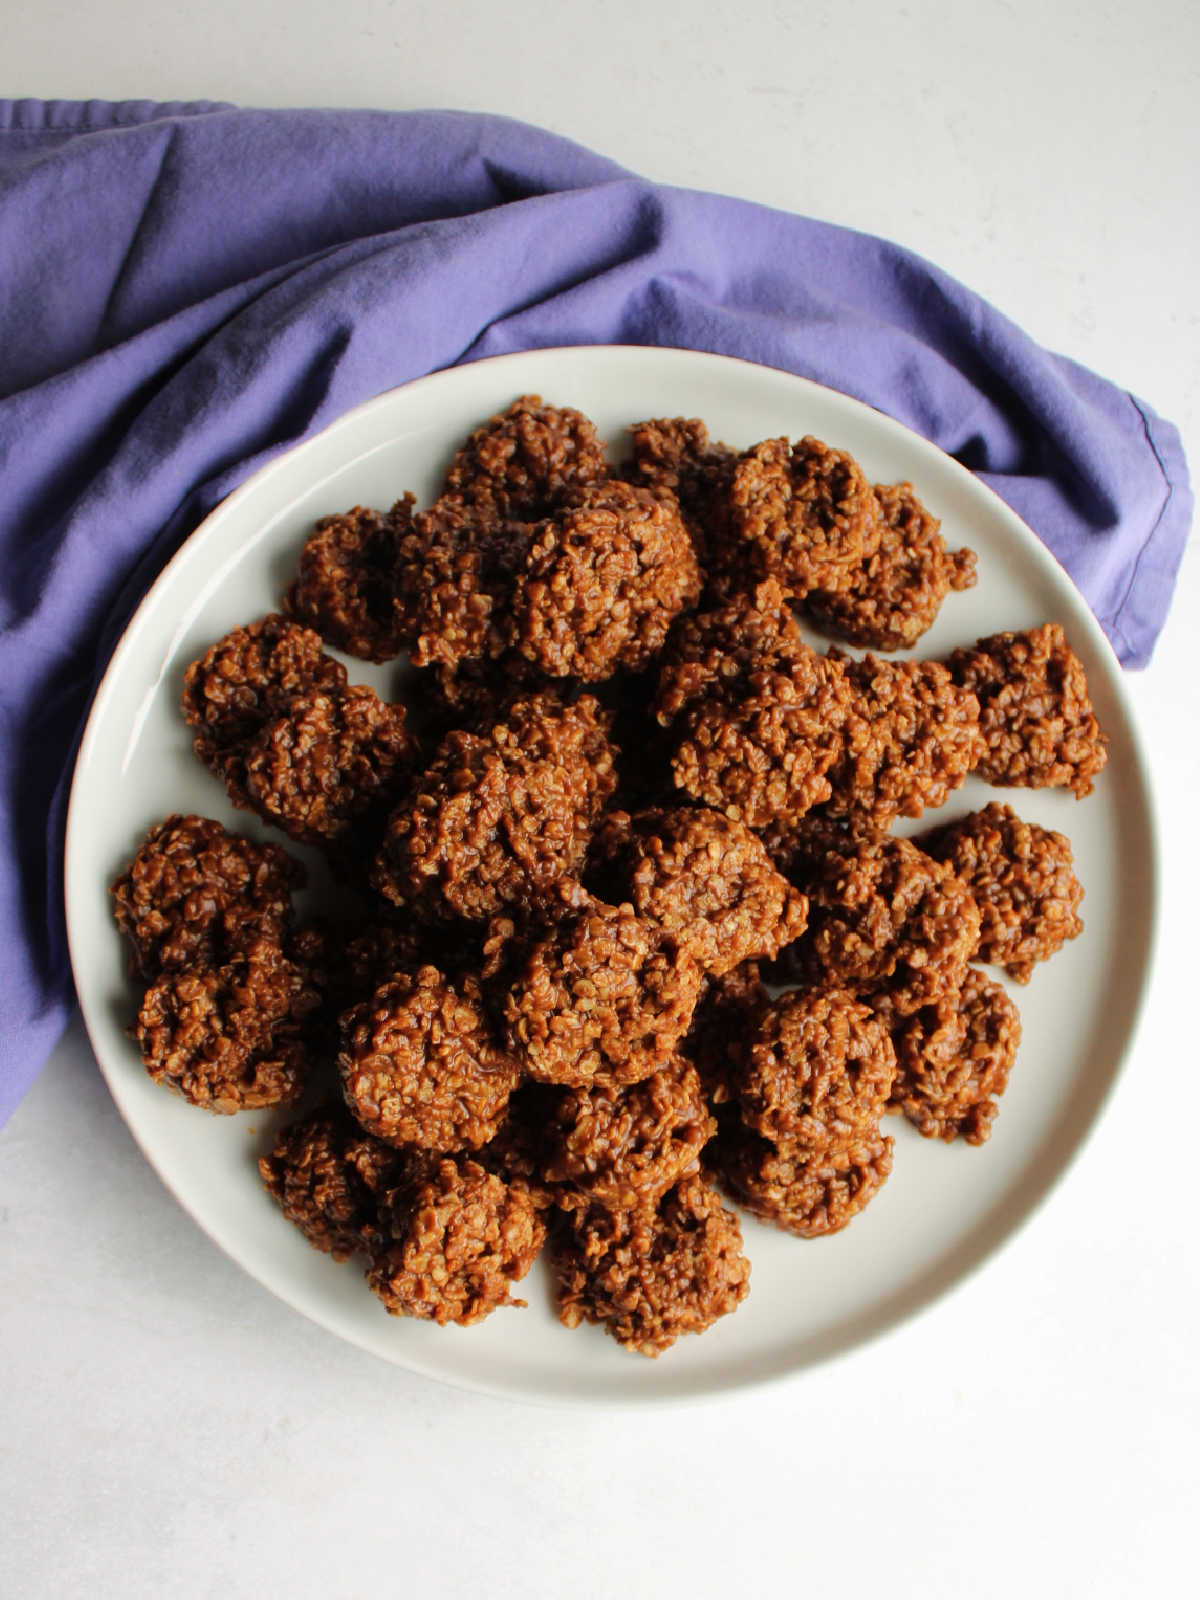 Pile of peanut butter chocolate no bake cookies with oatmeal.